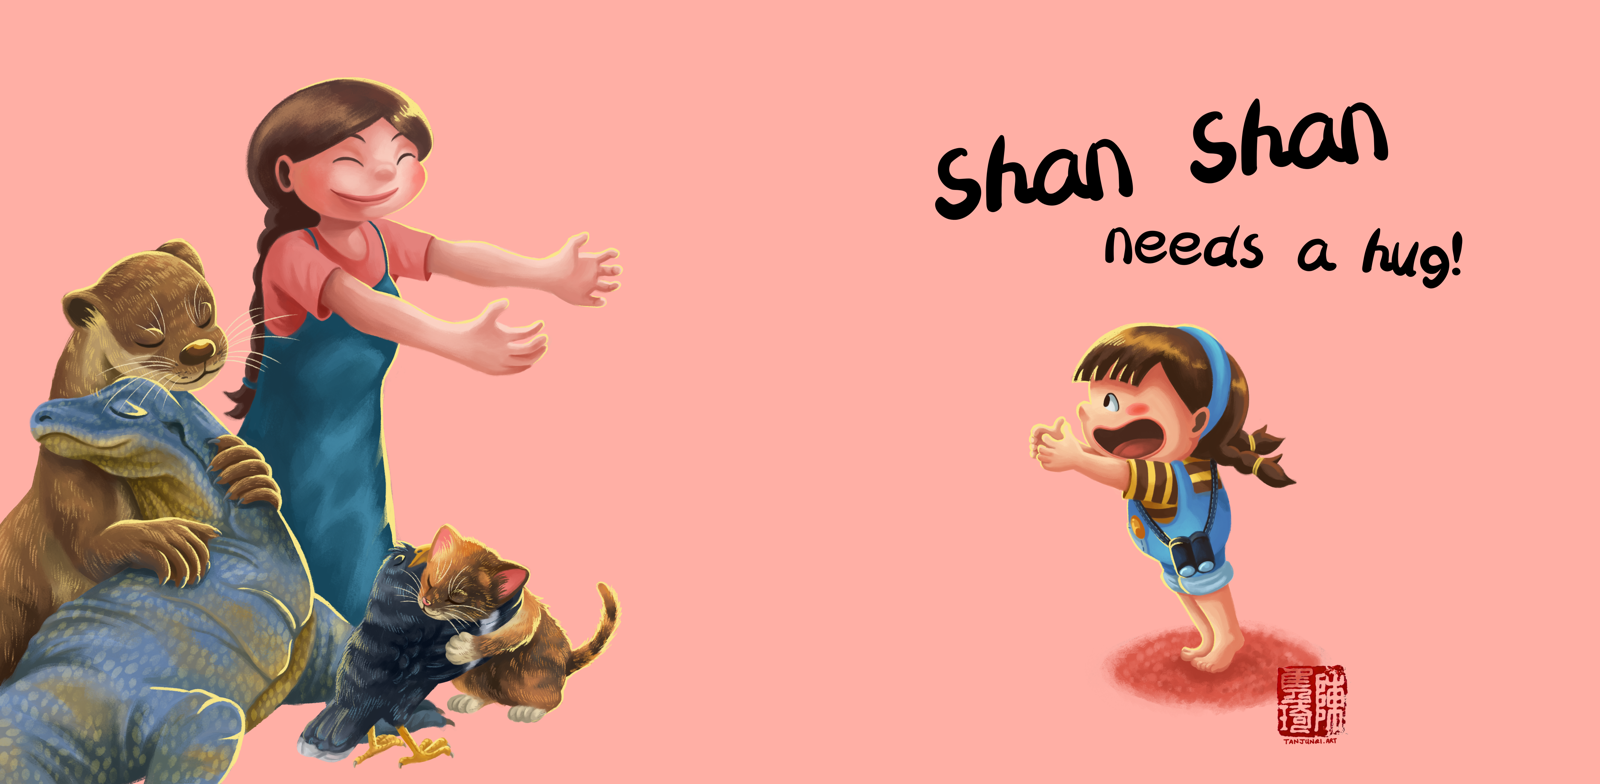 Book cover design (english version) for 'Shan Shan Needs a Hug'. The front cover shows Shan Shan looking to the left, standing on tiptoes with her arms outstretched, expecting a hug. On the back cover her mom is walking towards her also with arms outstretched, and Big Brother and Little Sister Kitty are in a warm embrace, as are Mr. Otter and Ms. Water Monitor.